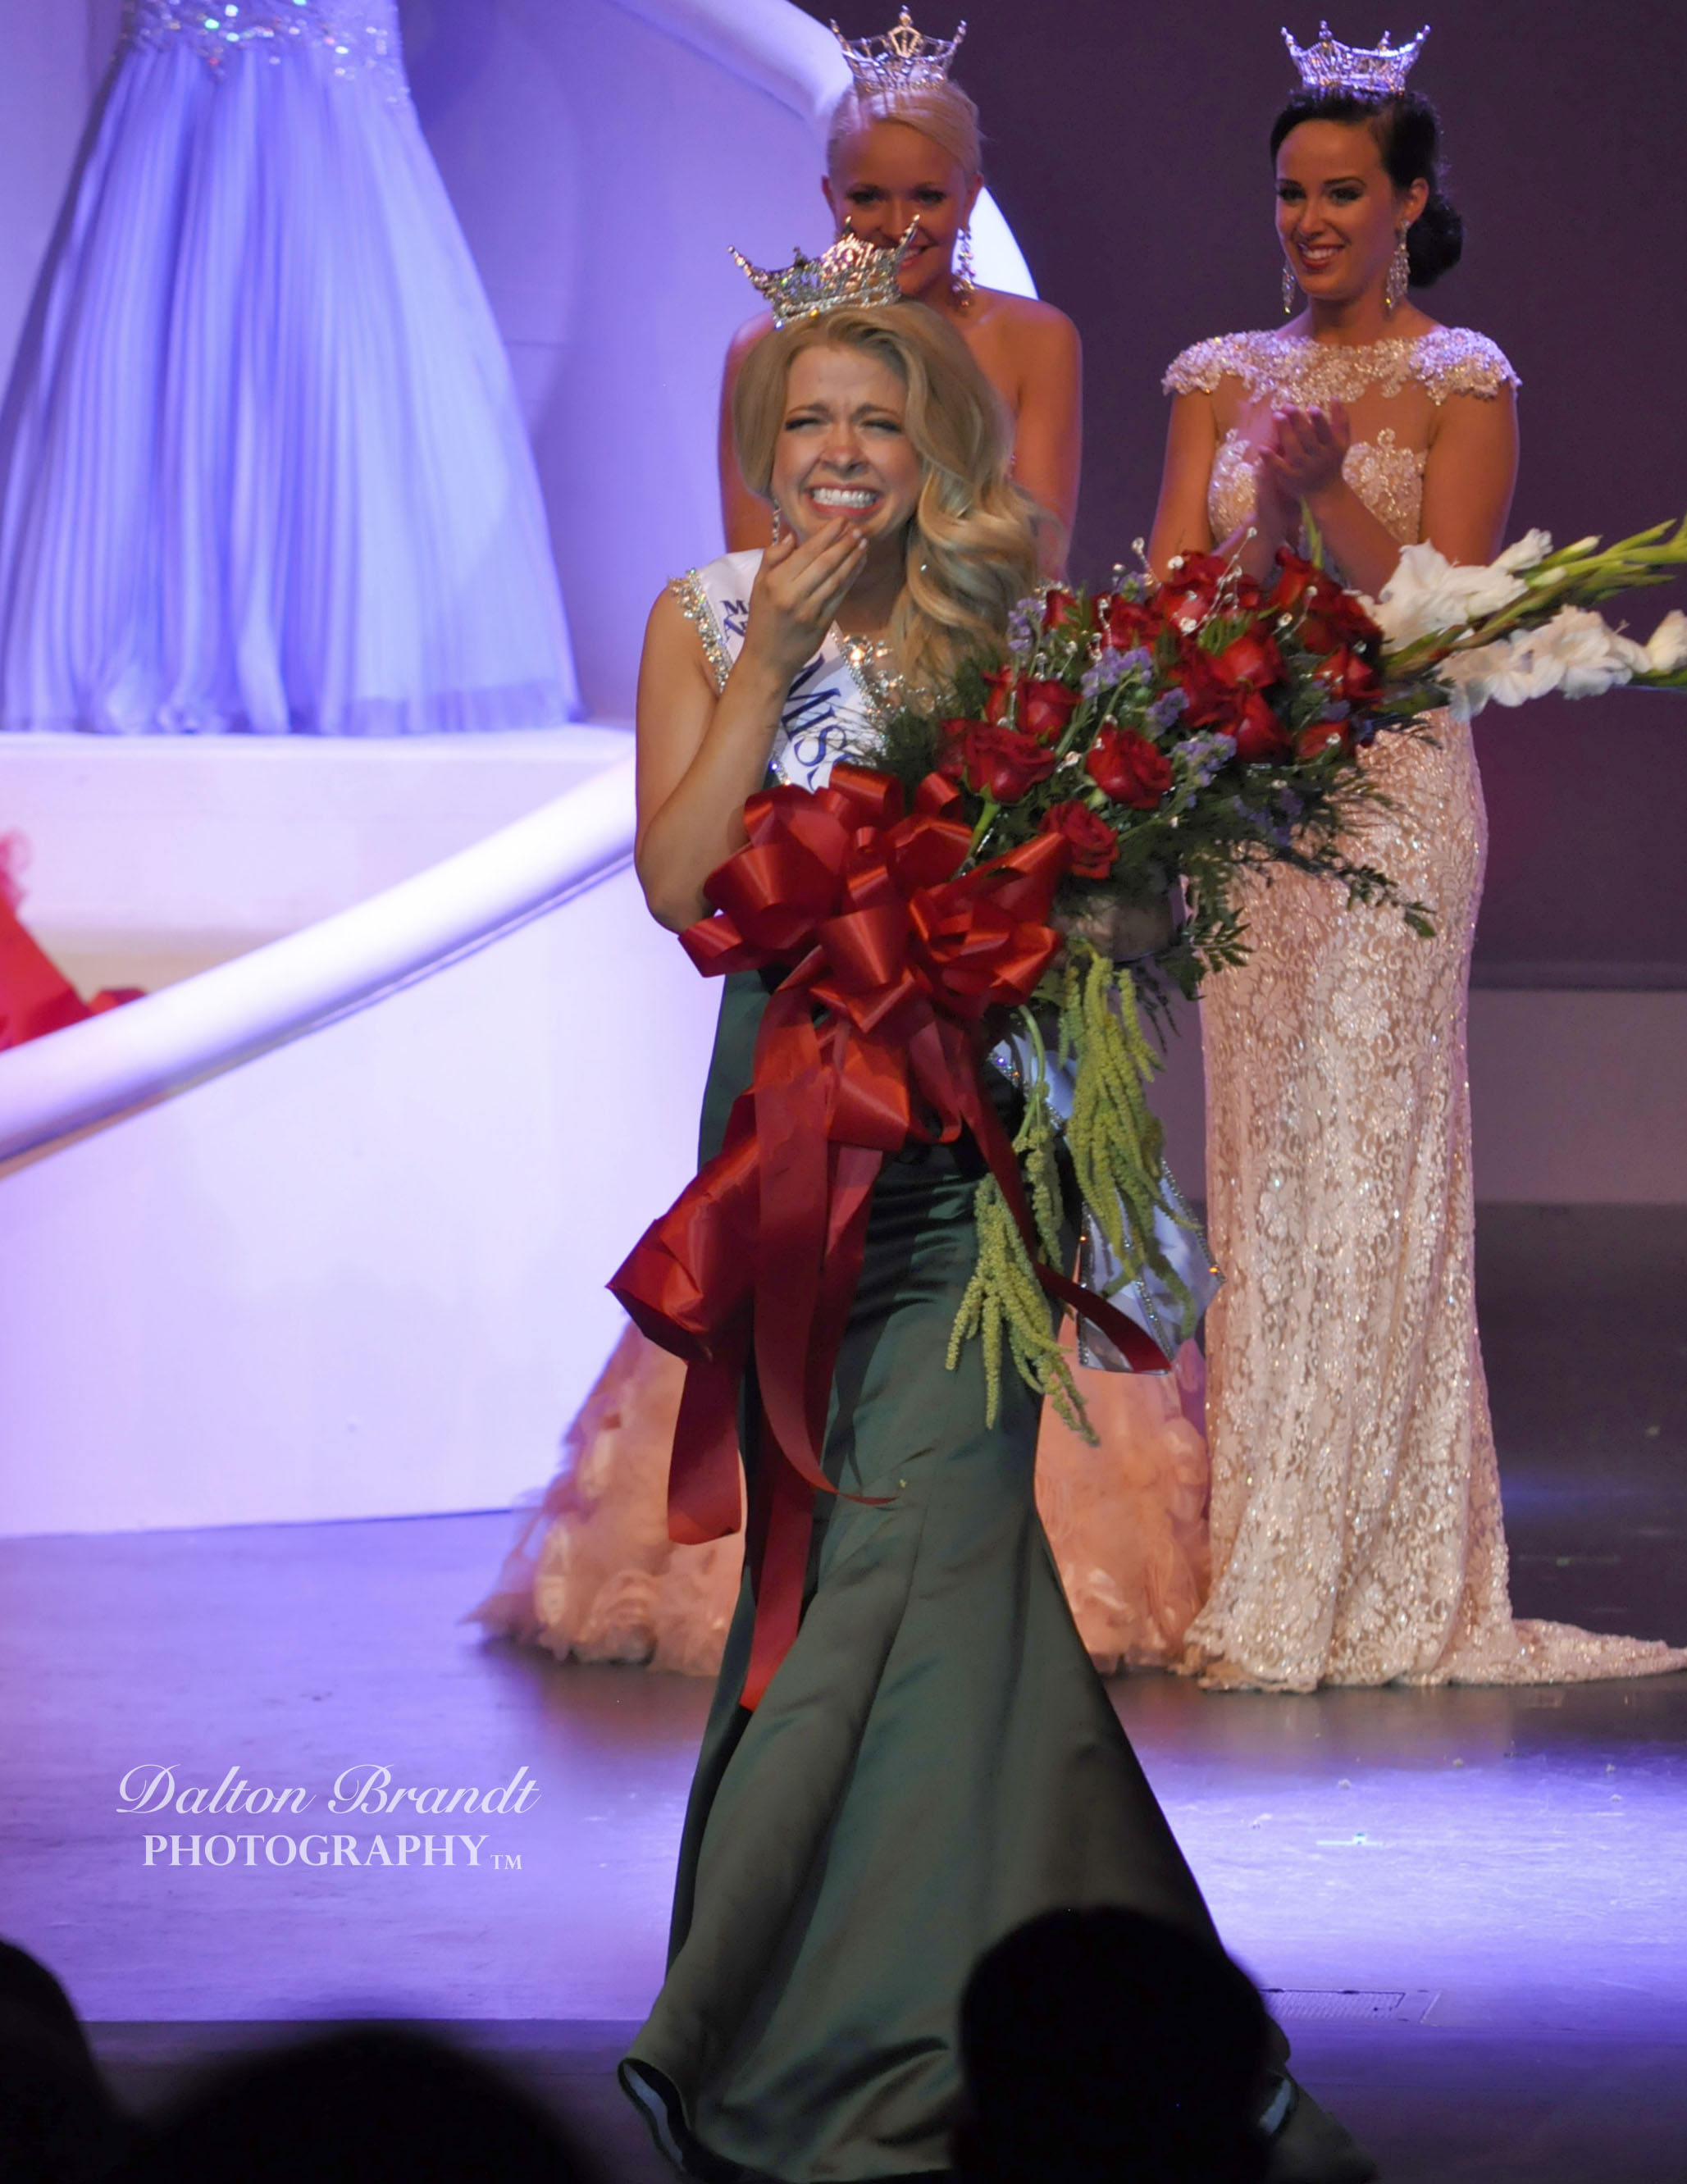 Miss Indiana, Audra Casterline of Fishers, accepts her crown in ceremonies held June 22. (Submitted photo)